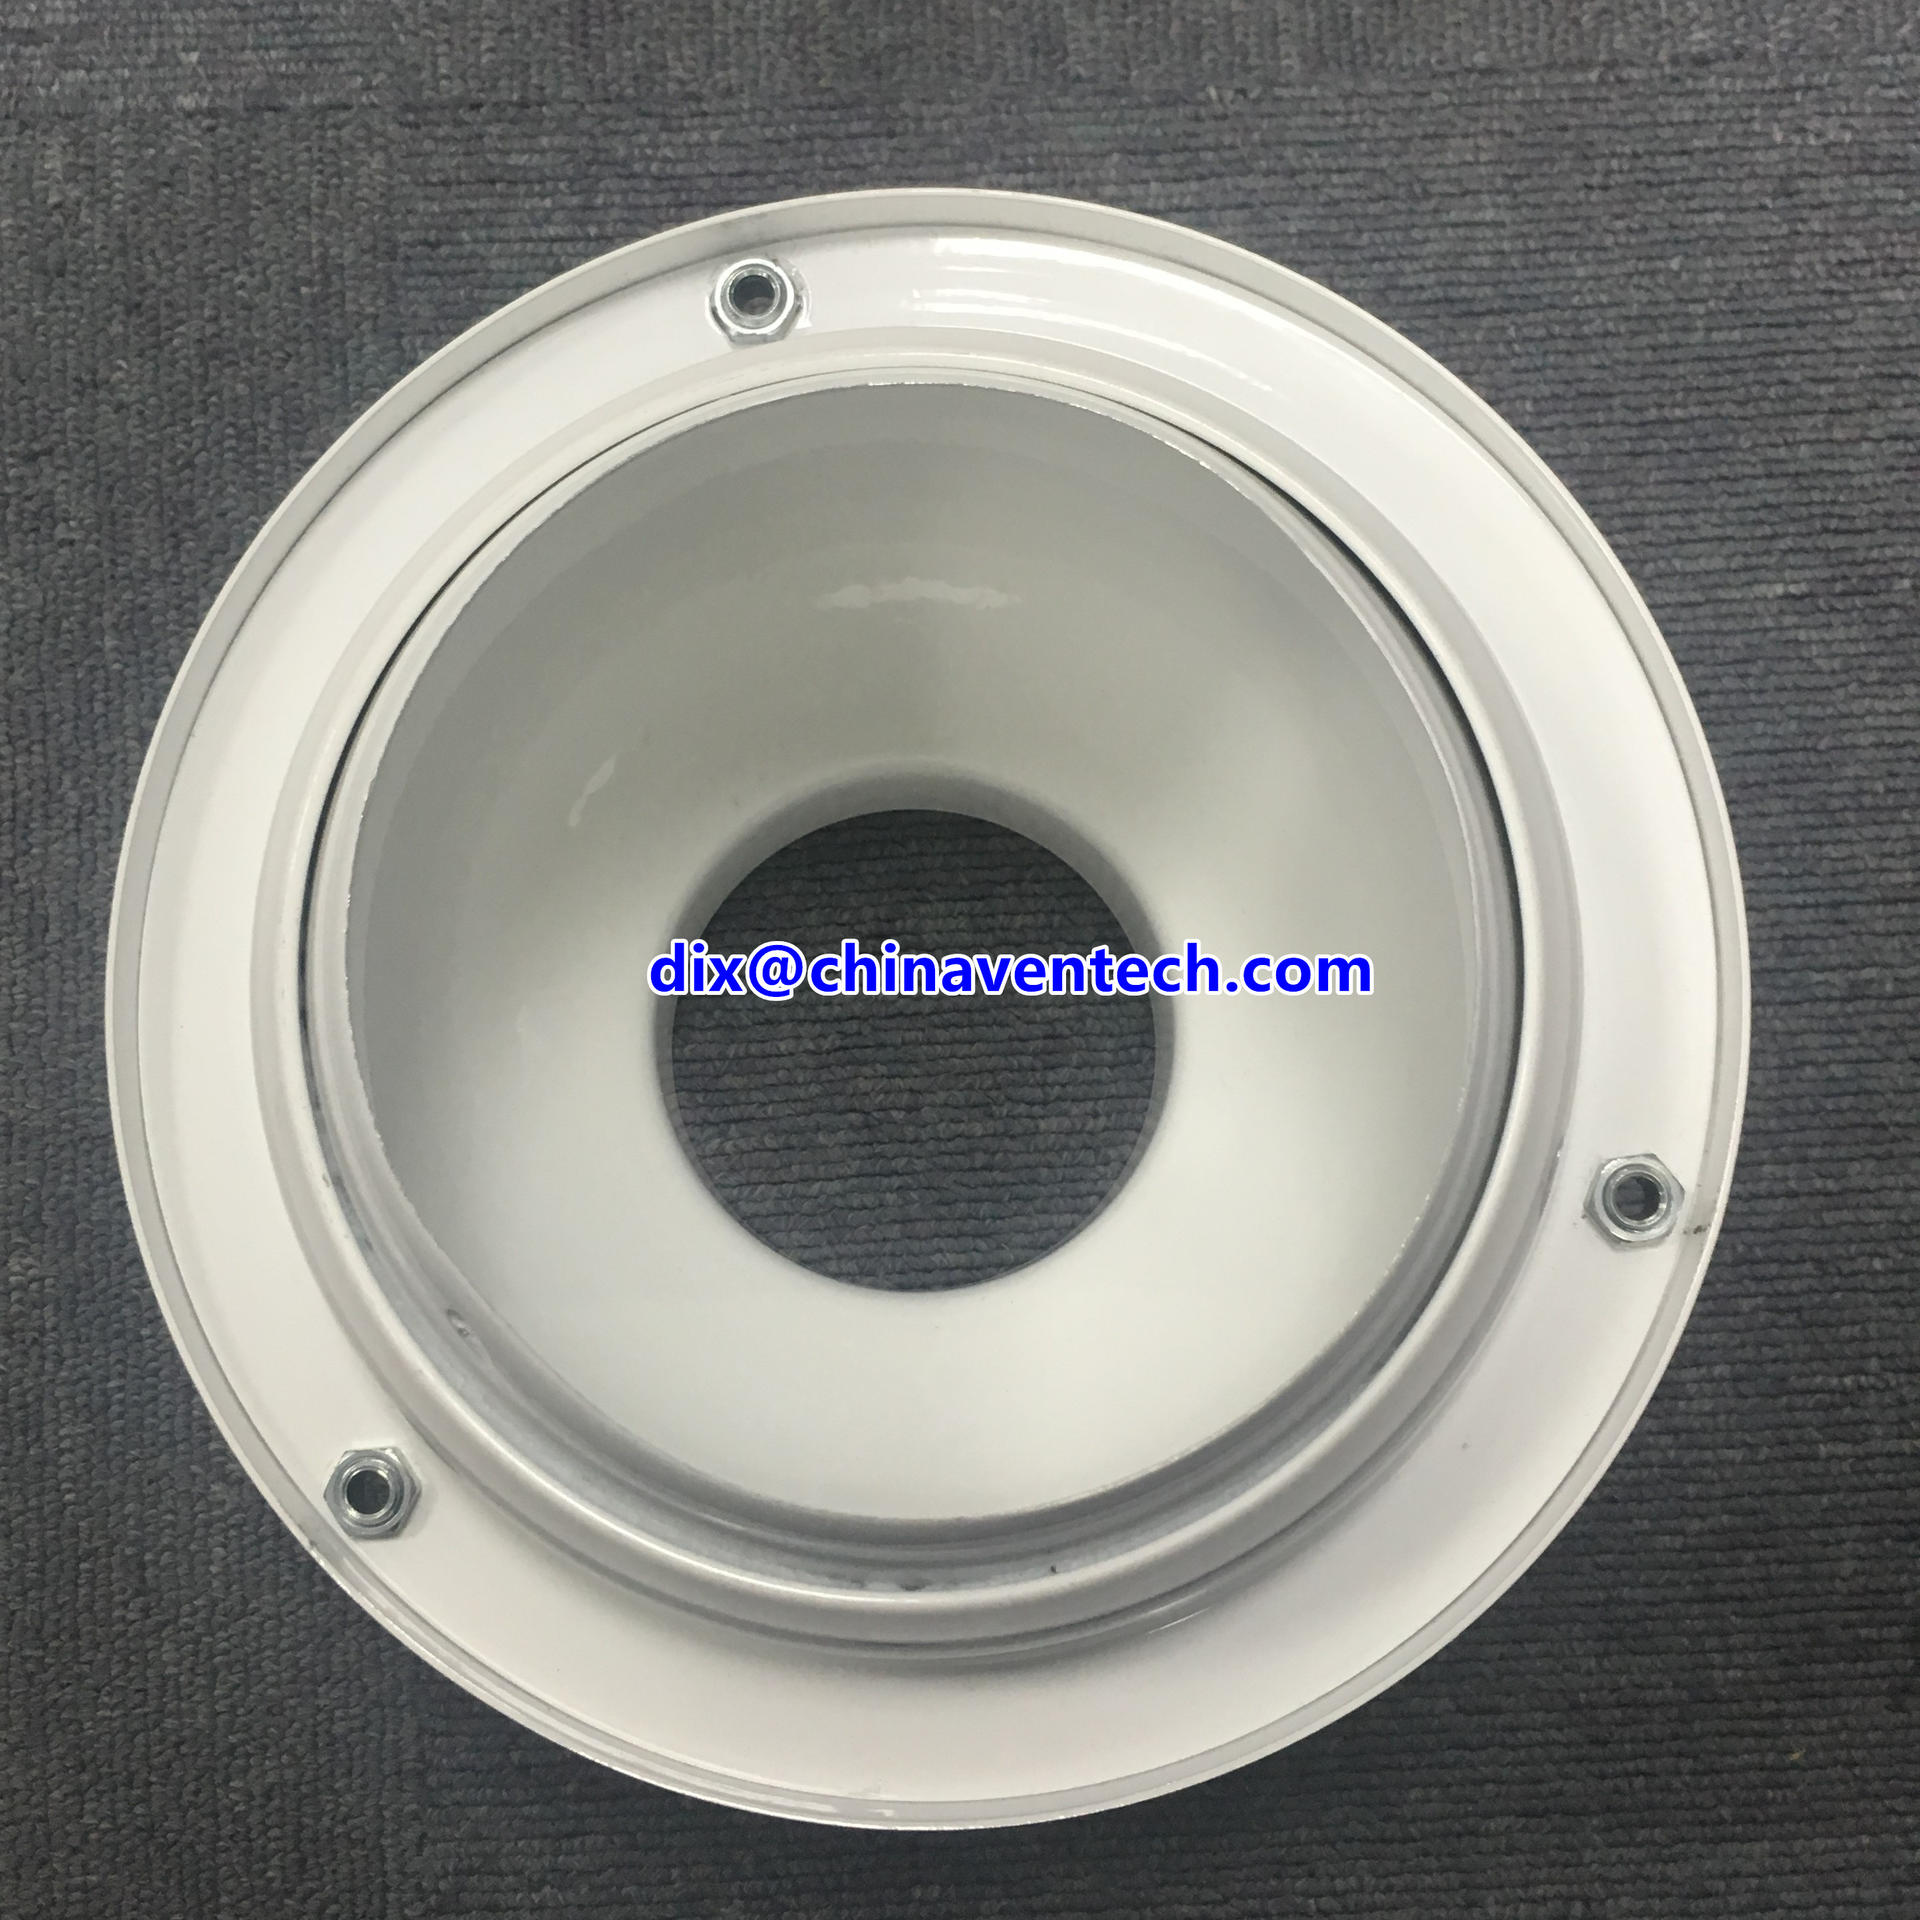 Round Jet Air Diffuser Hvac System Aluminium Supply Air Ceiling Duct Round Ball Spout Jet Diffusers